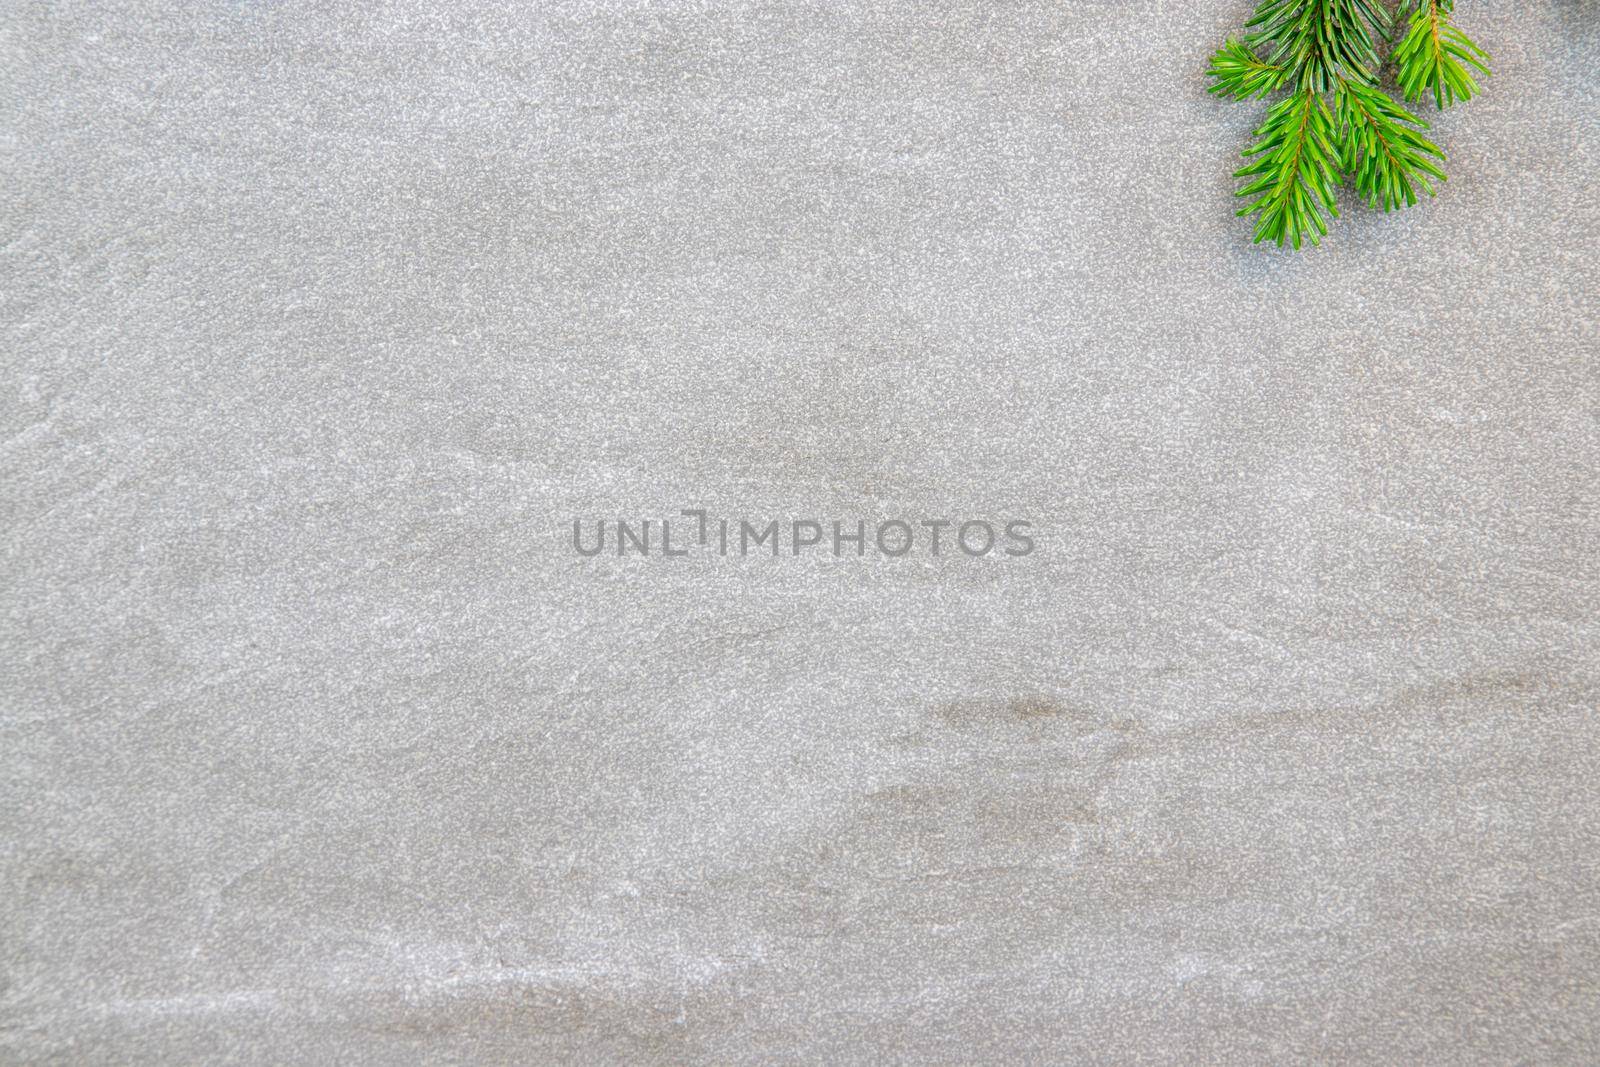 Christmas motif, texture, background with branches of a Nordmann fir right at the top on a grey marbled  background with free space for text